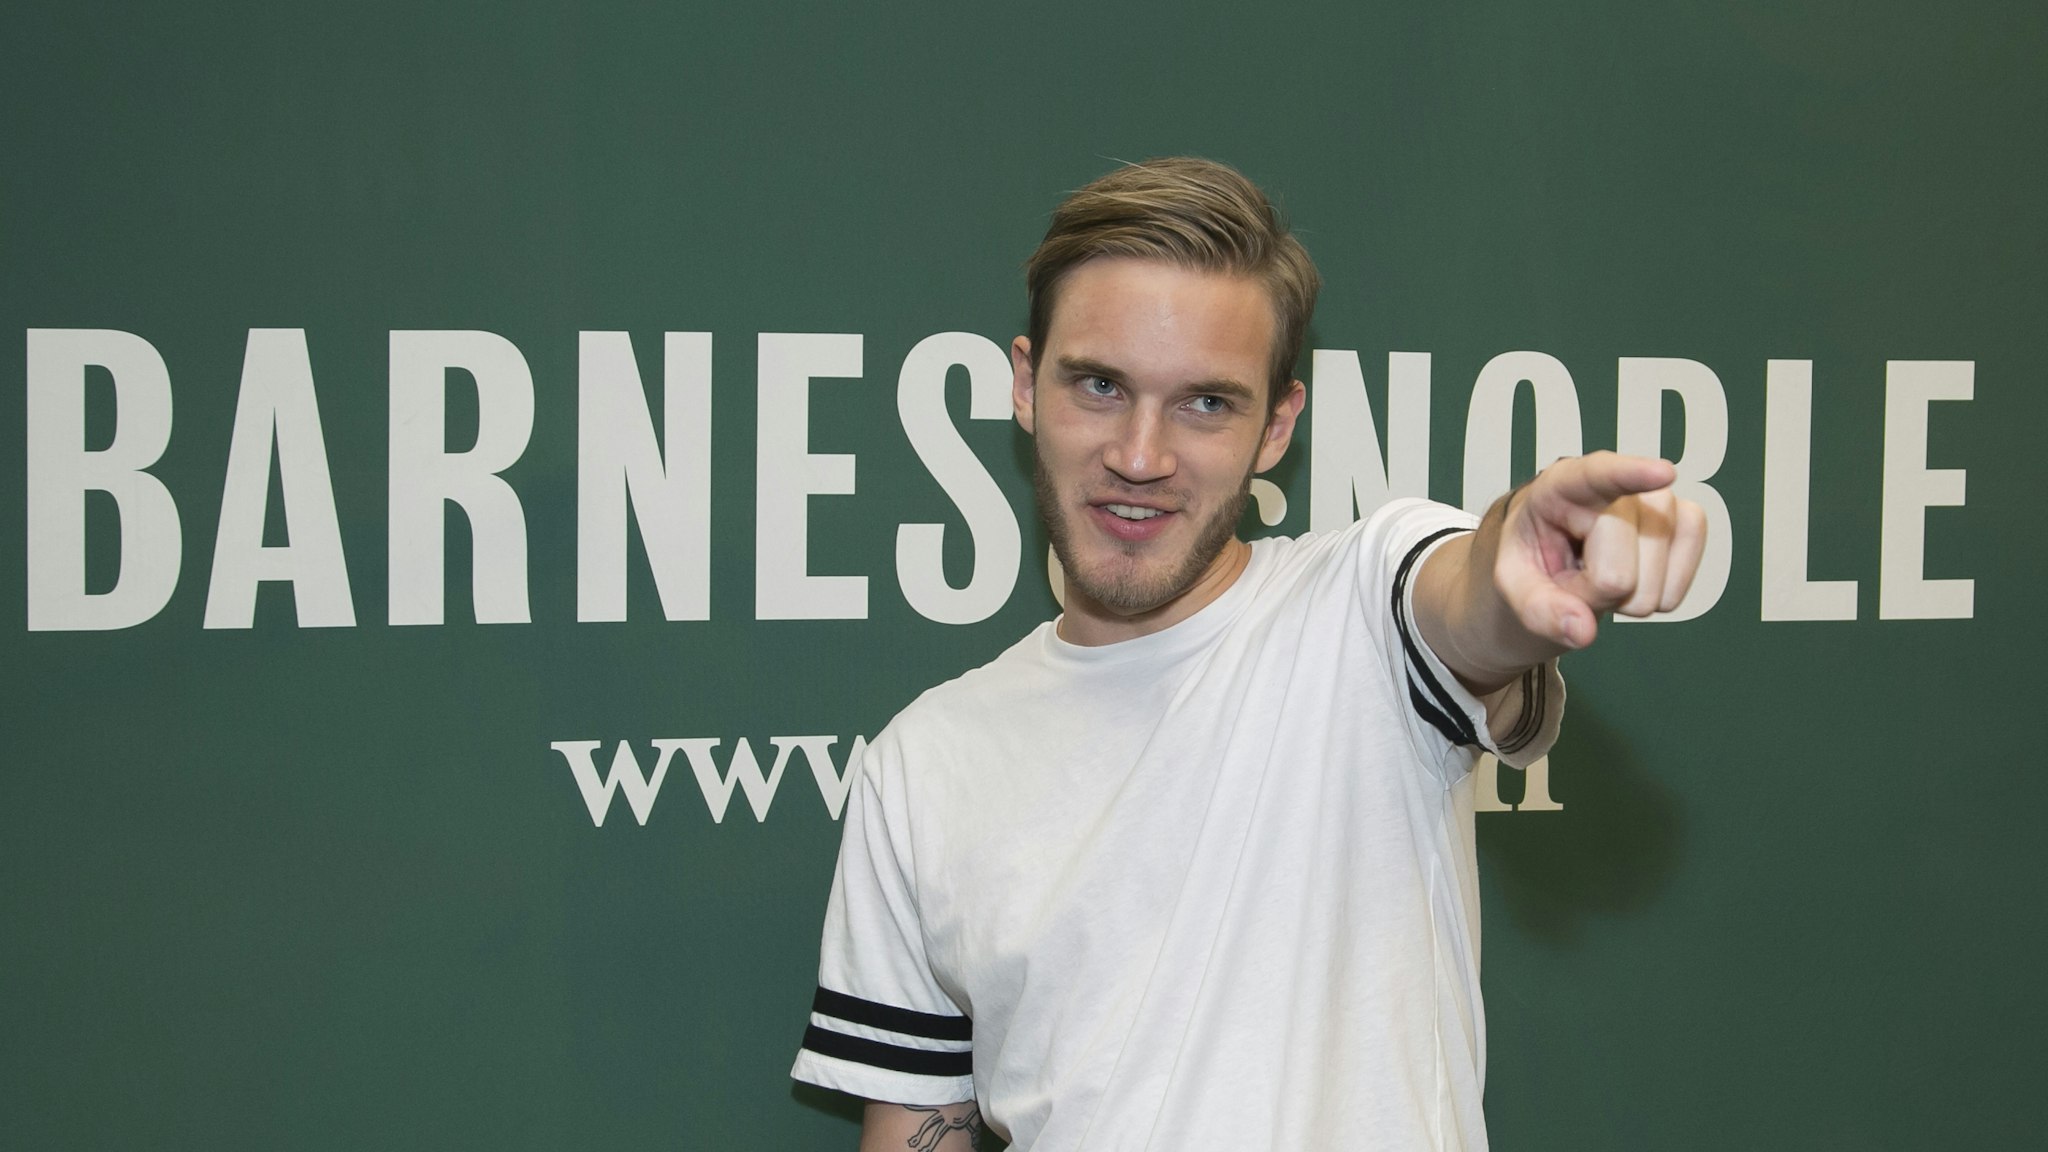 LOS ANGELES, CA - OCTOBER 30: Comedian PewDiePie signs his new book "This Book Loves You" at Barnes & Noble at The Grove on October 30, 2015 in Los Angeles, California. (Photo by Vincent Sandoval/WireImage)